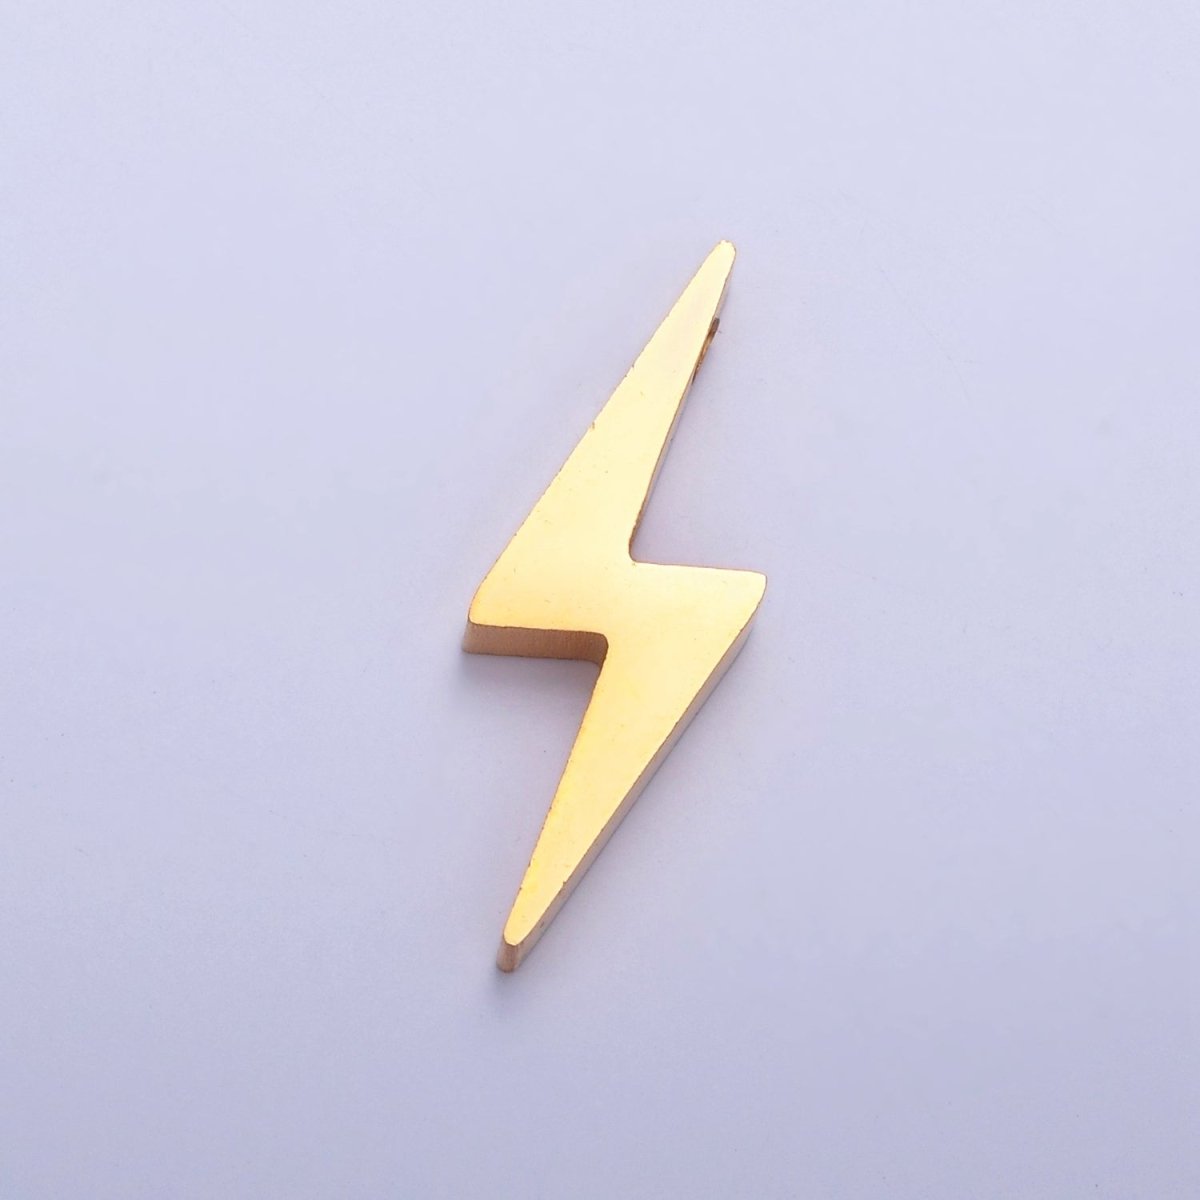 Stainless Steel Lightning Bolt Bead, Minimalist 23mmx8.3mm Thunderbolt Bead Jewelry Component For Jewelry Making W-837 W-838 - DLUXCA